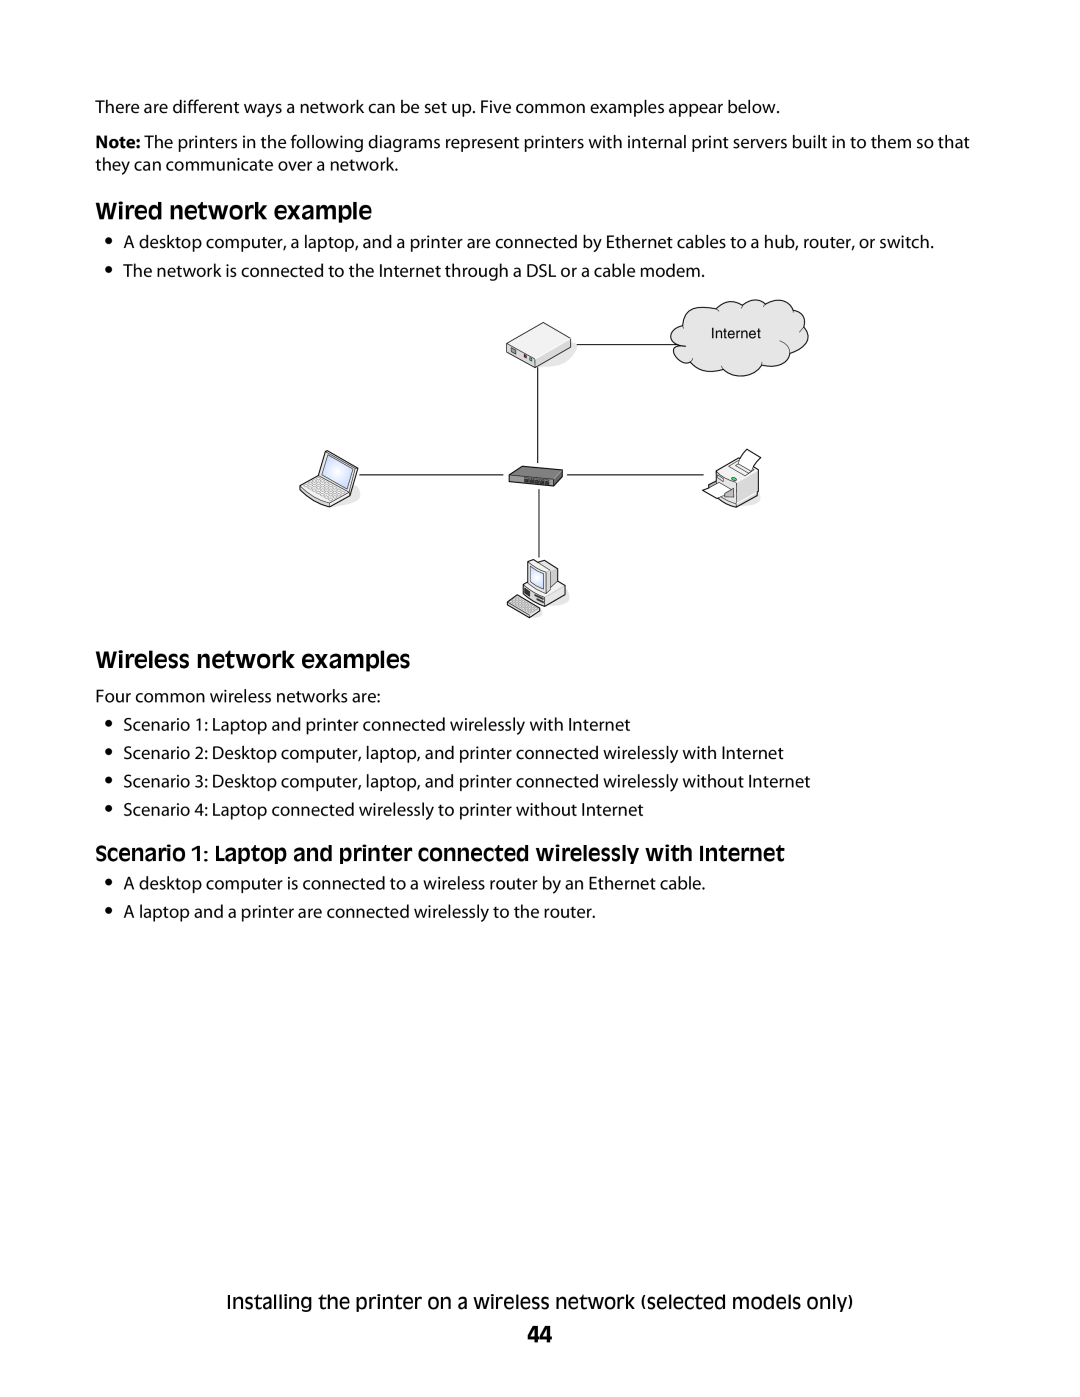 Lexmark 4600, 3600 manual Wired network example, Wireless network examples 